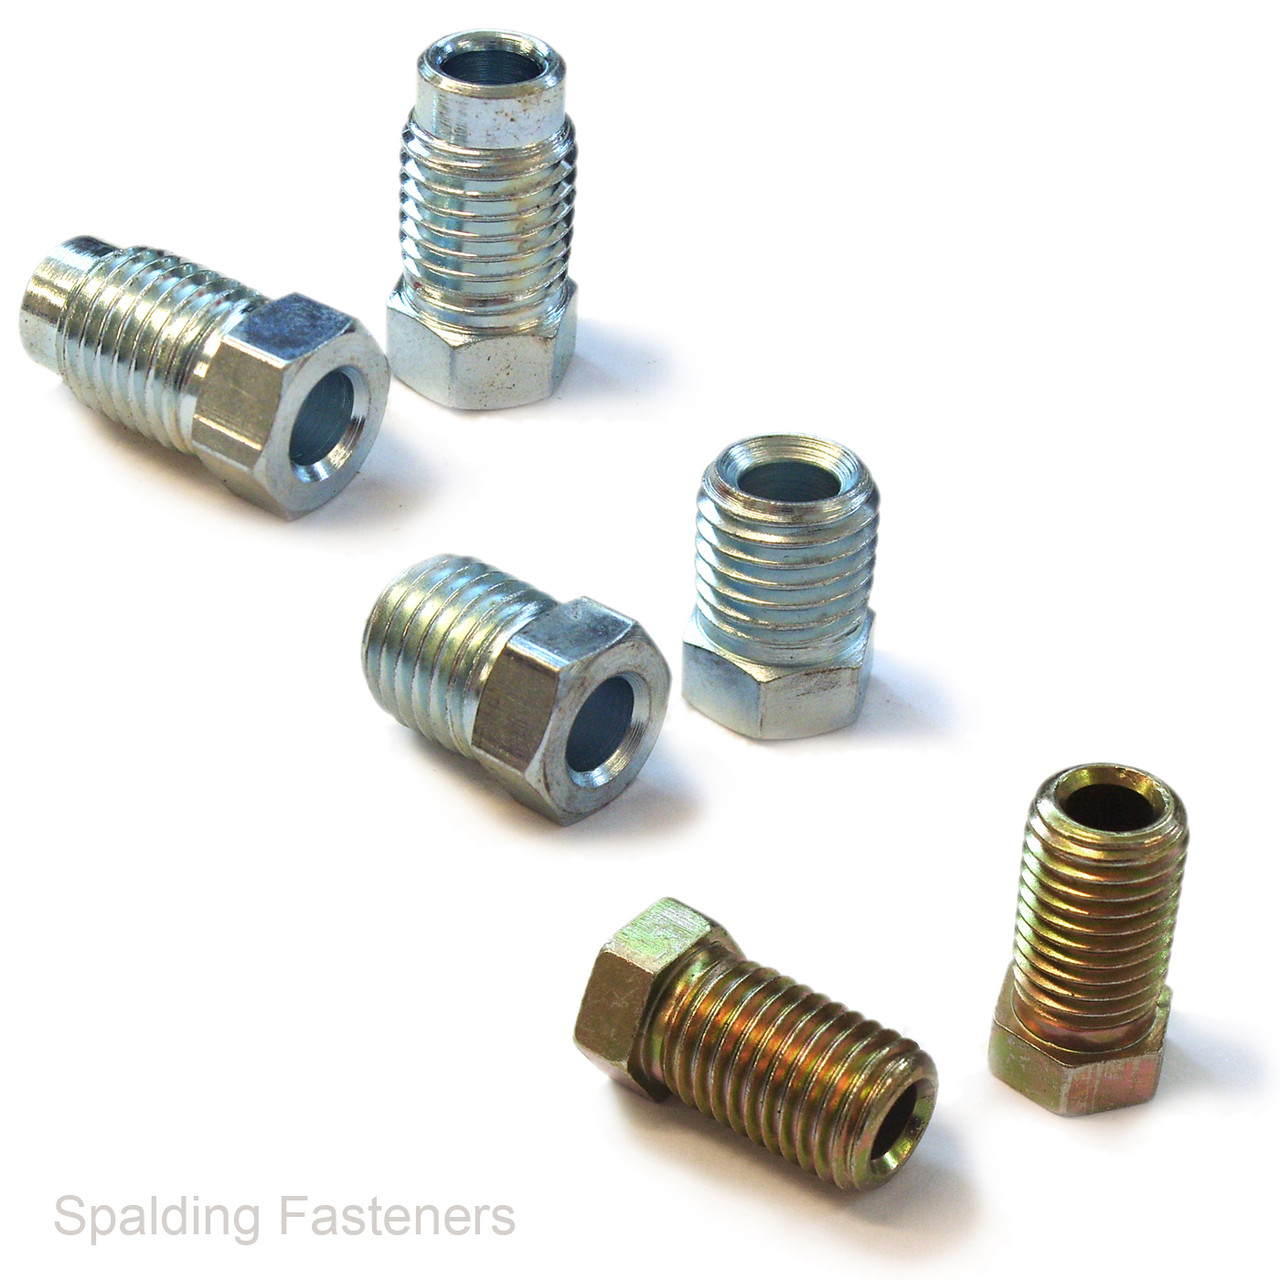 Metric Fine & Extra Fine Brake Nuts For 3/16" Pipe